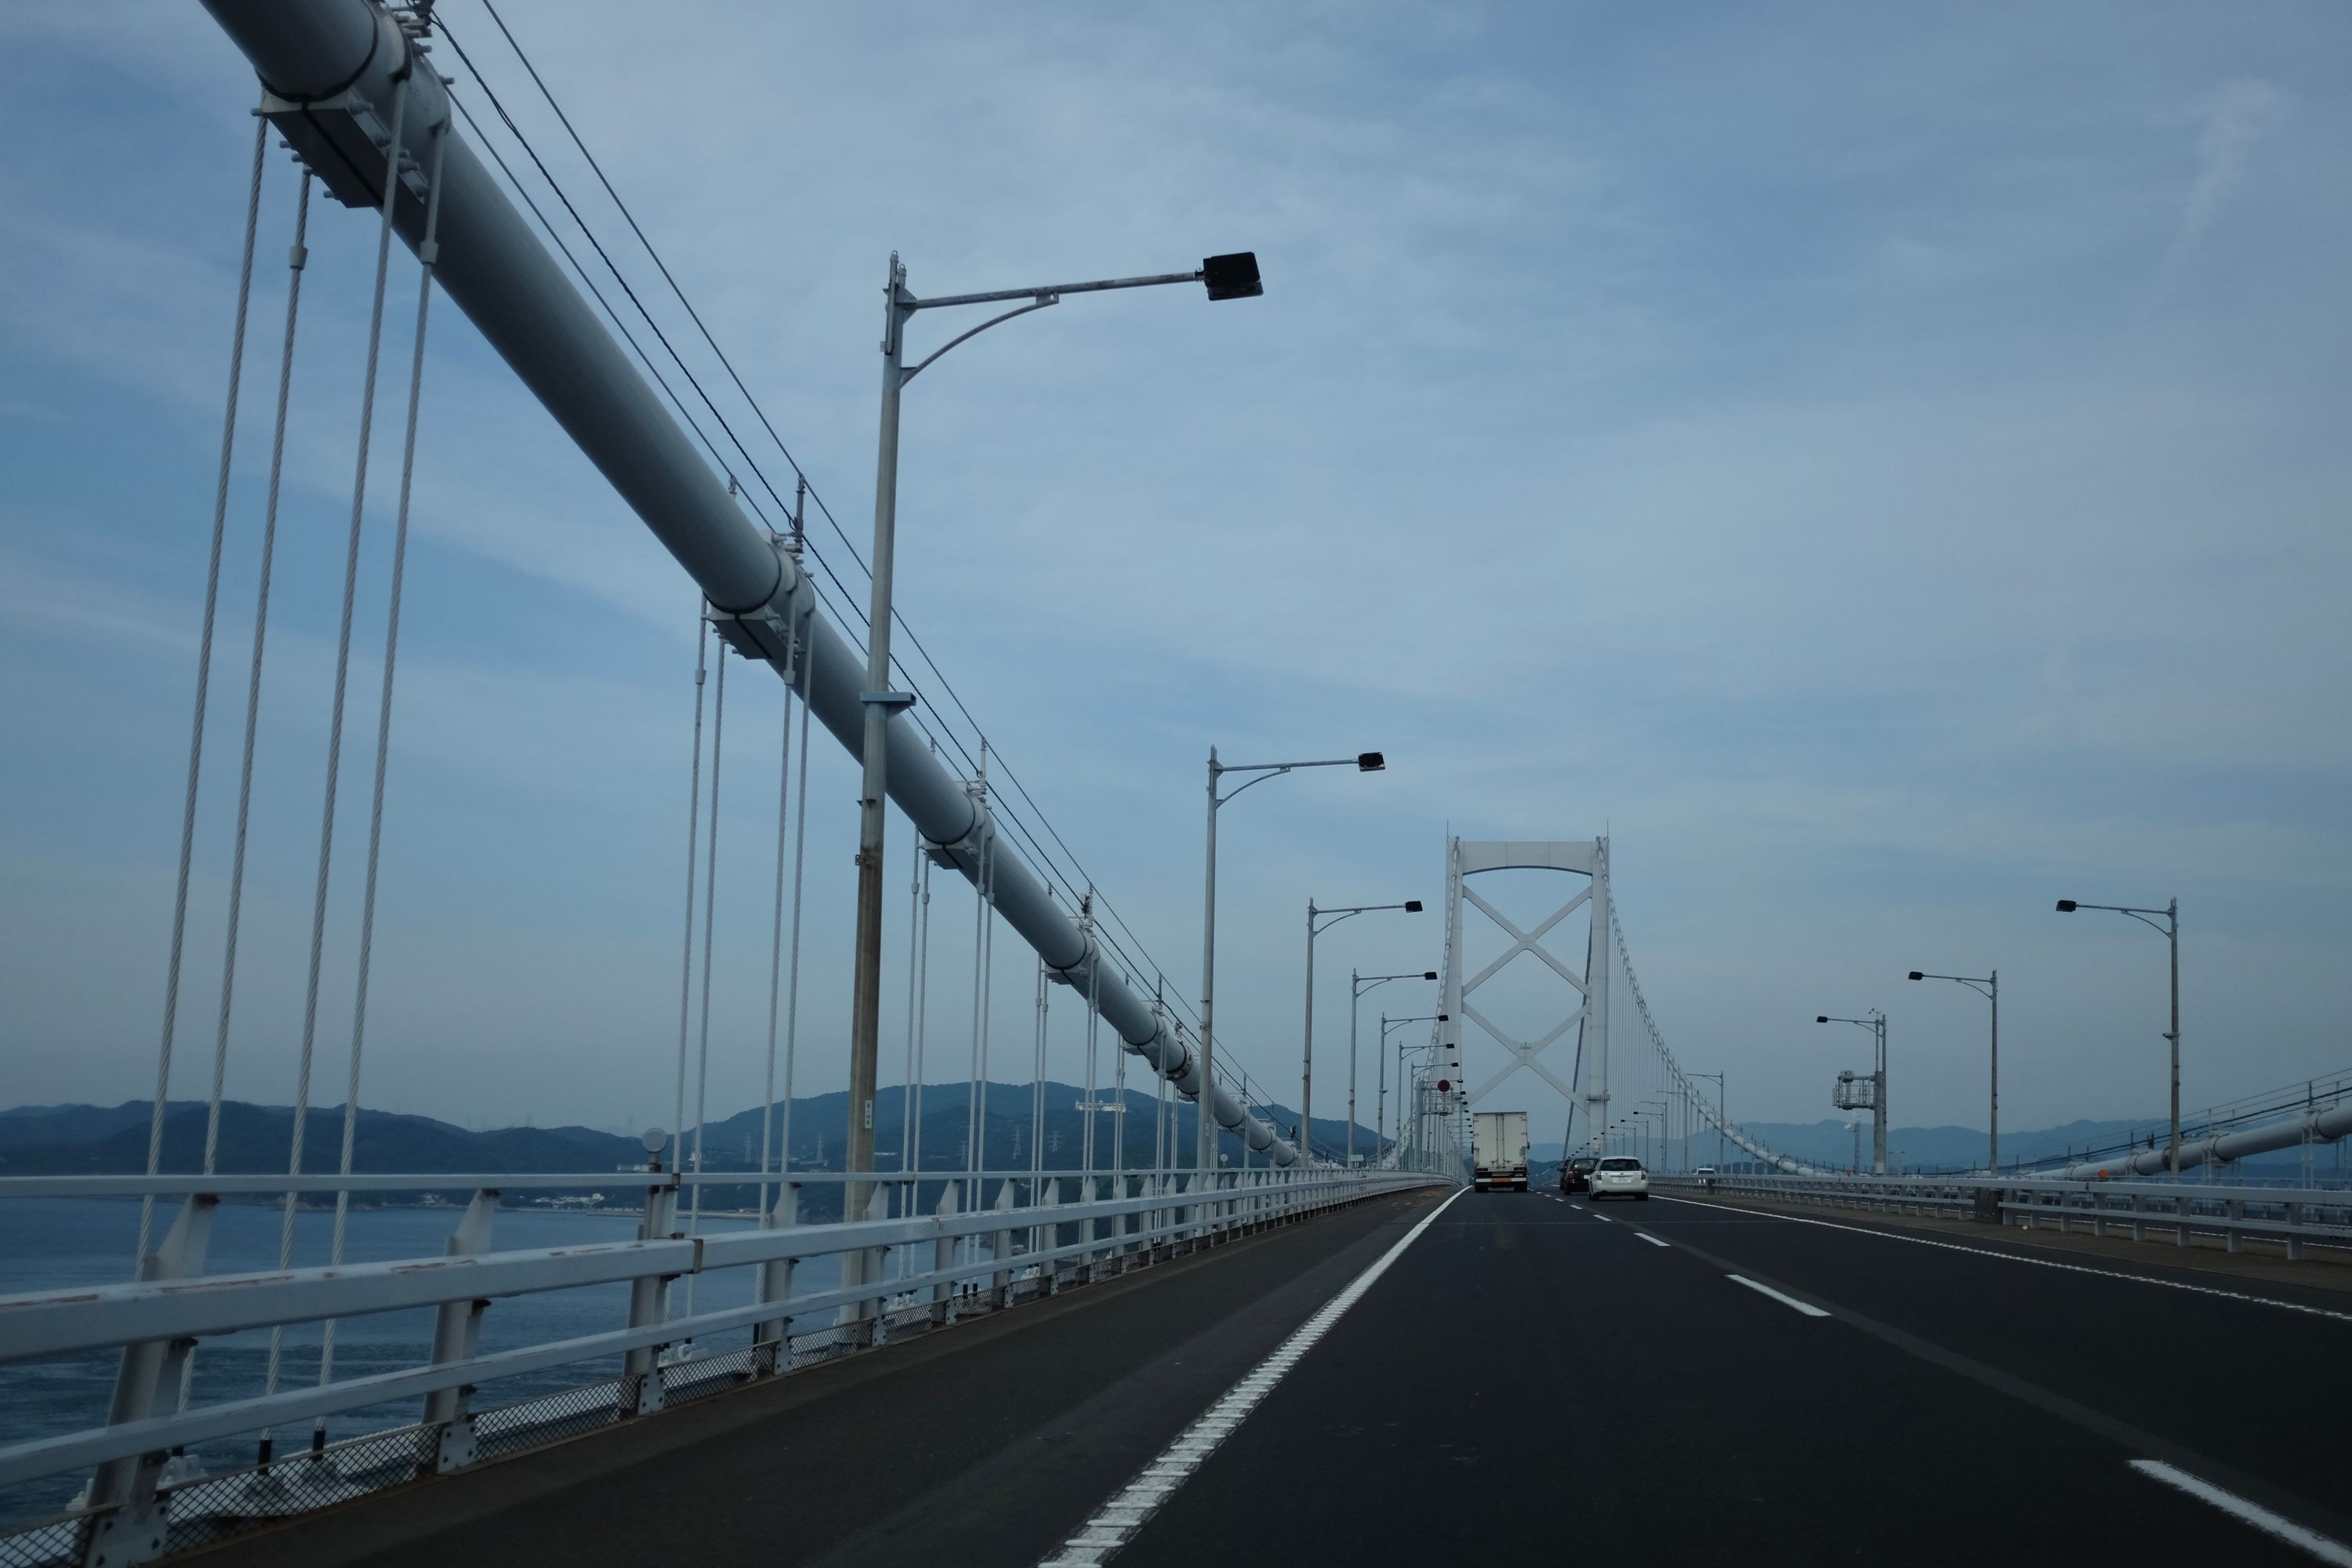 Looking straight ahead out of a car at the halfway point of the Great Naruto Bridge.